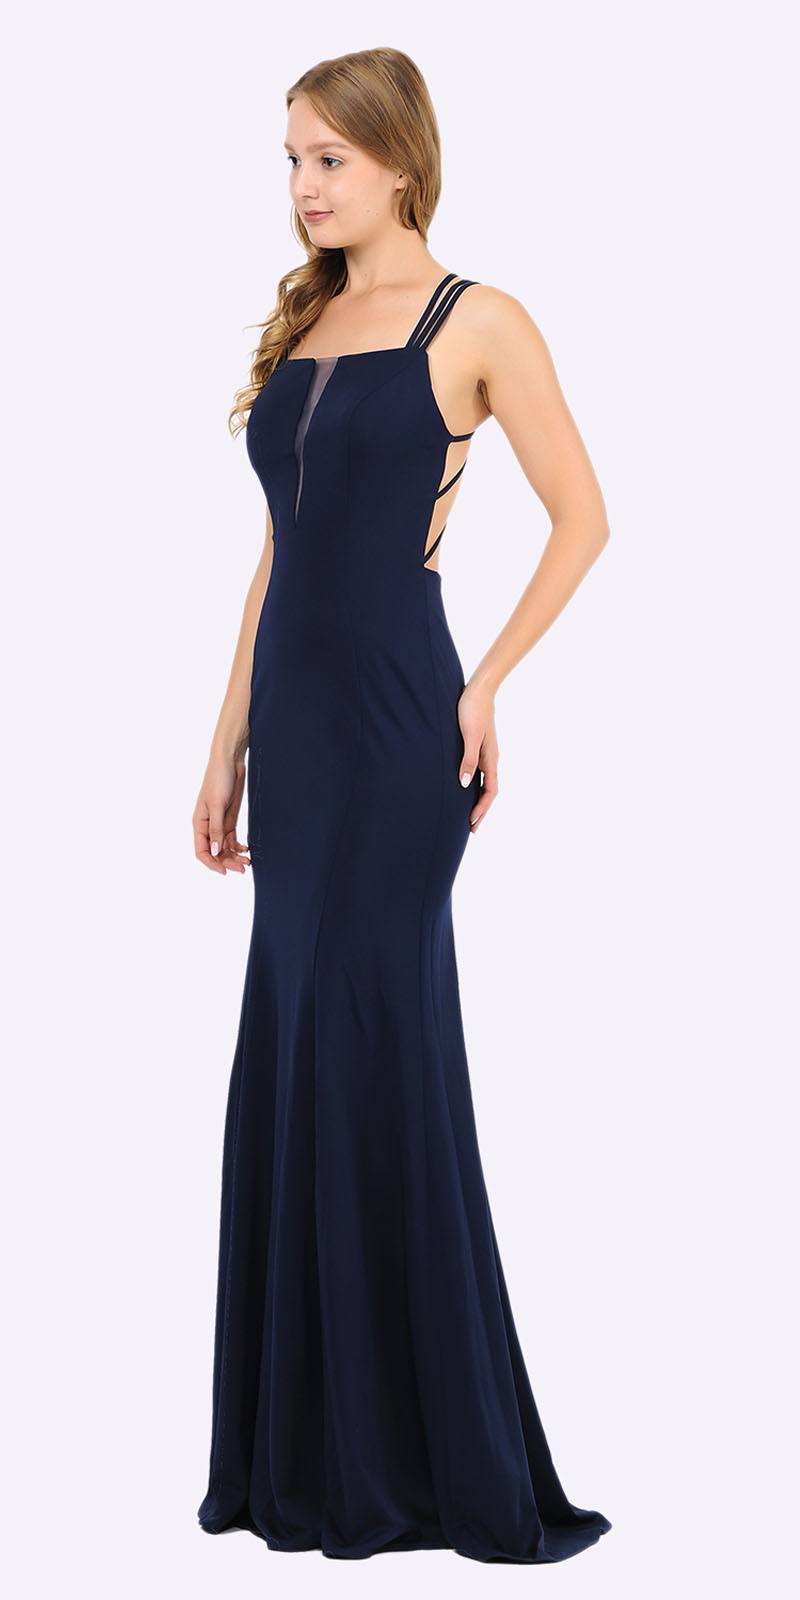 Poly USA 8468 Navy Blue Long Prom Dress with Strappy Open-Back